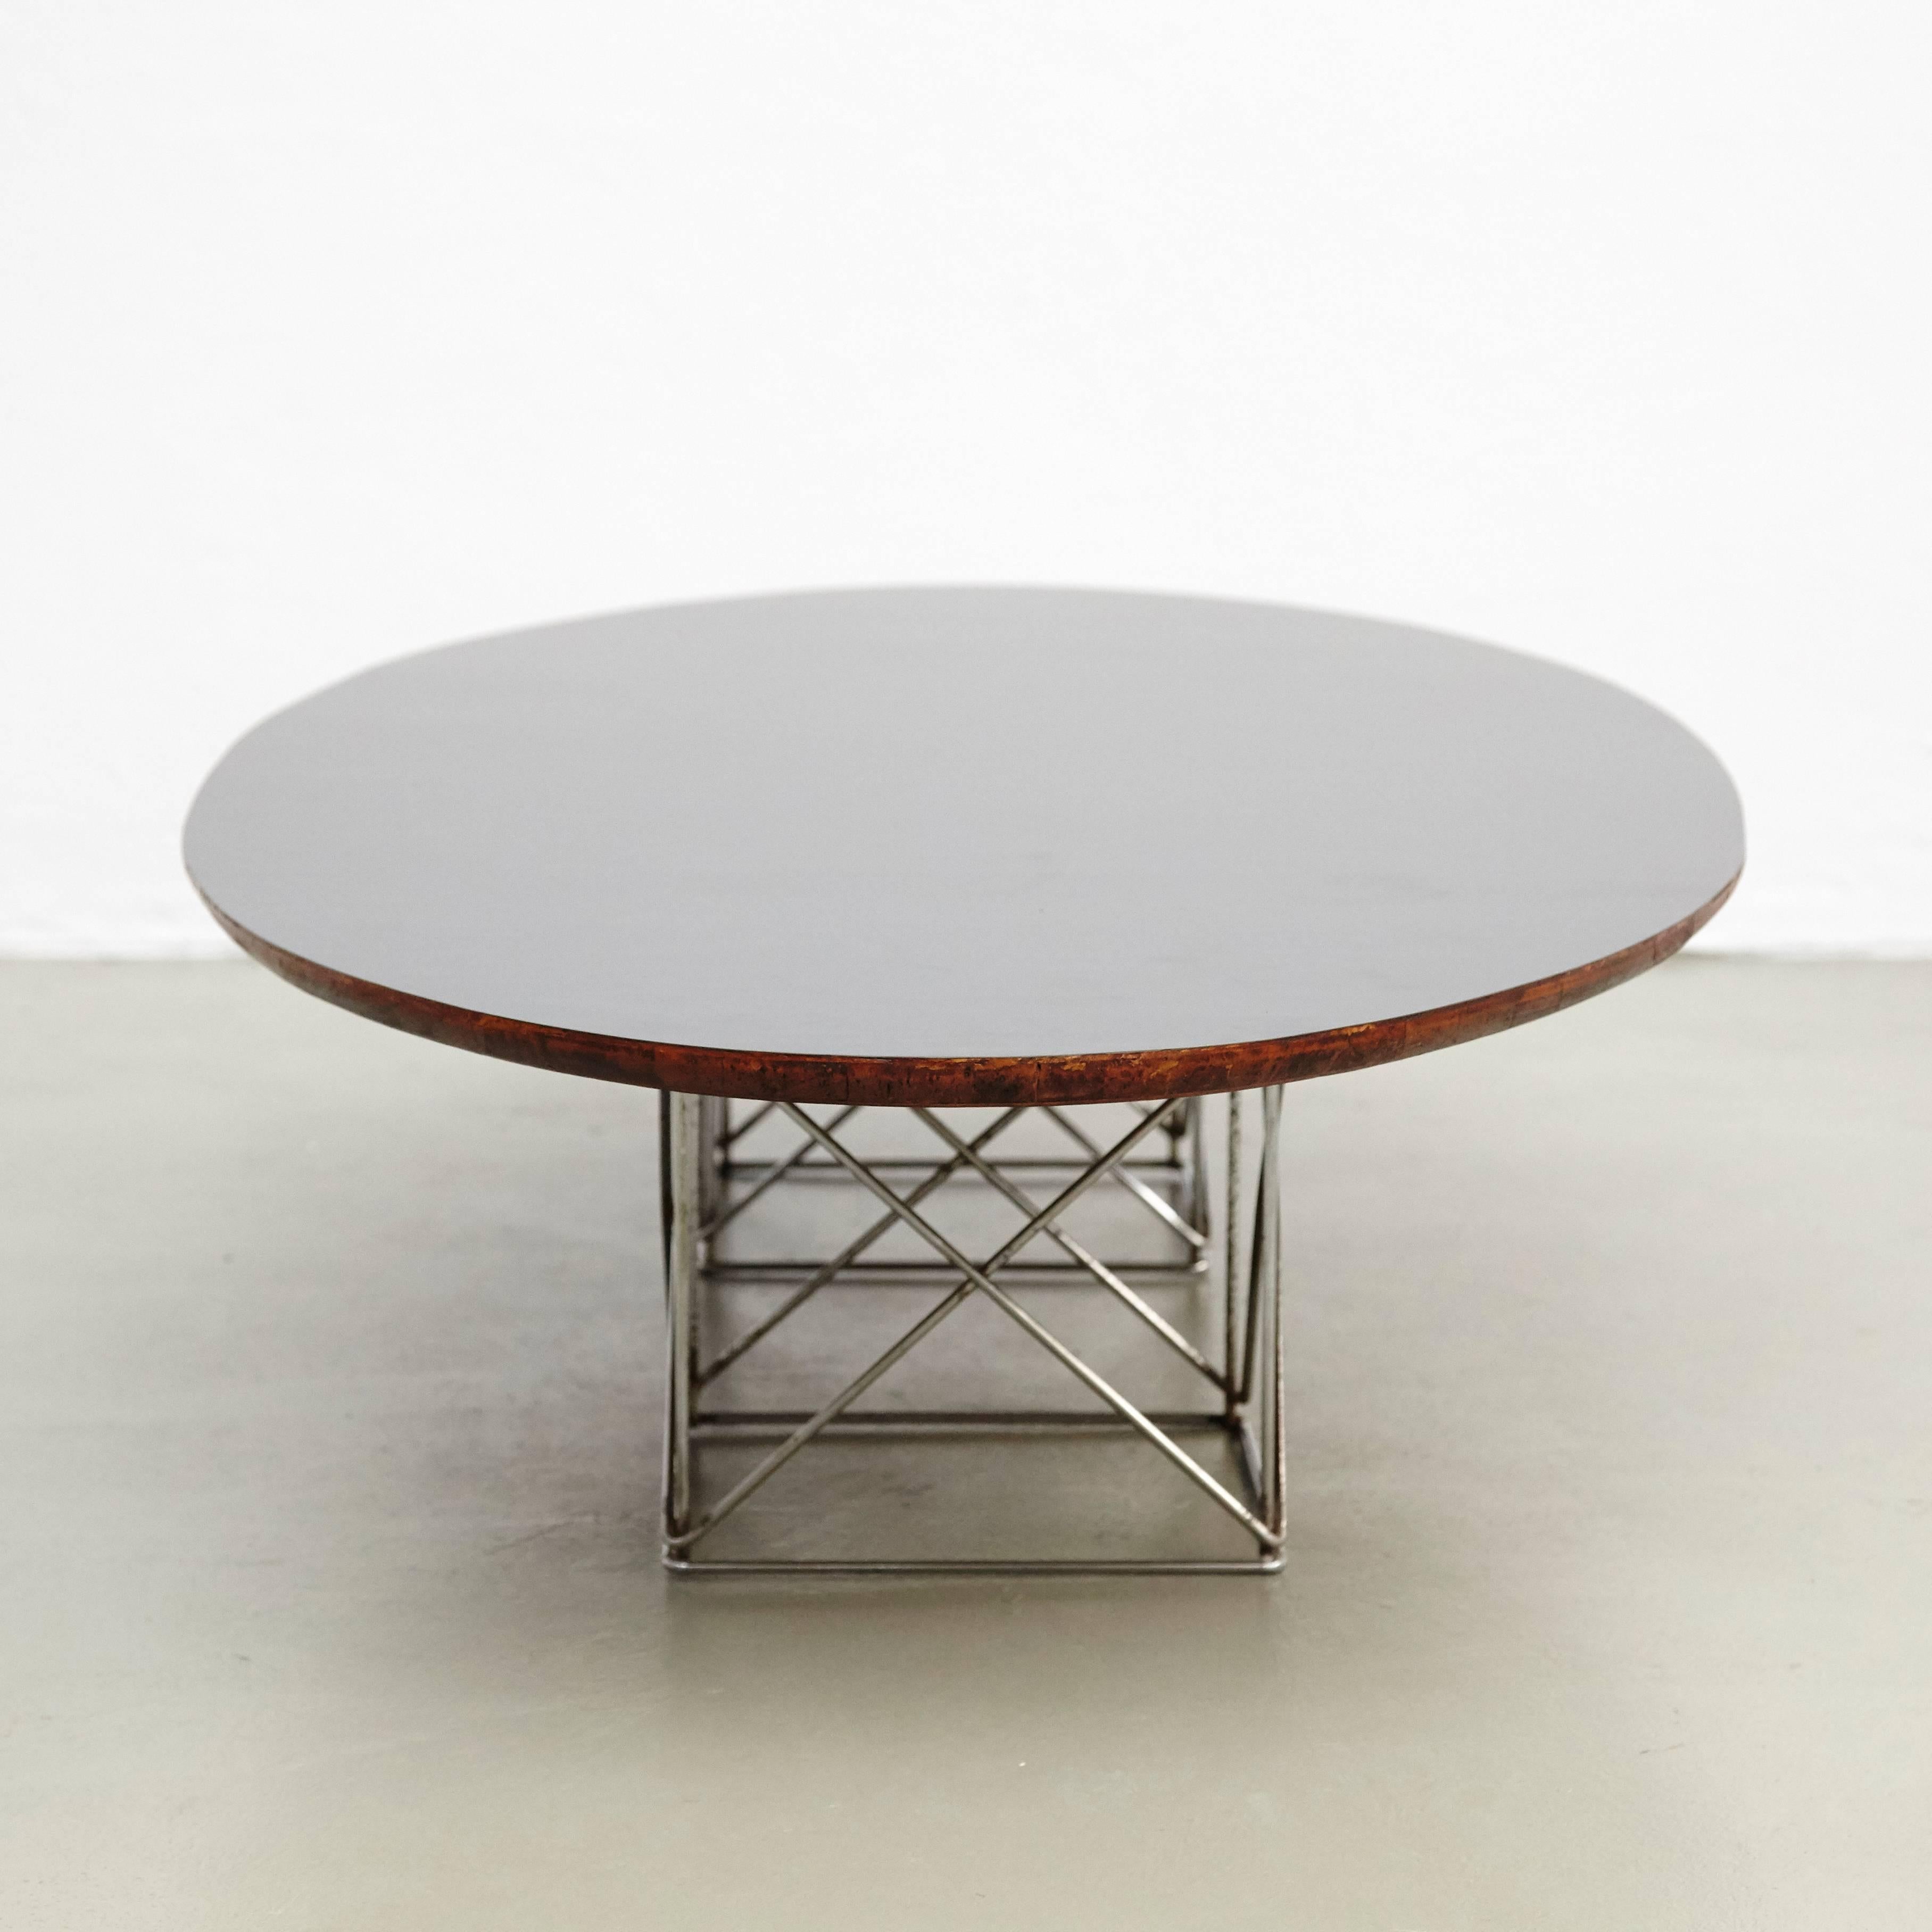 French After Charles Eames Mid-Century Modern Metal Wood Formica Low Table, circa 1970